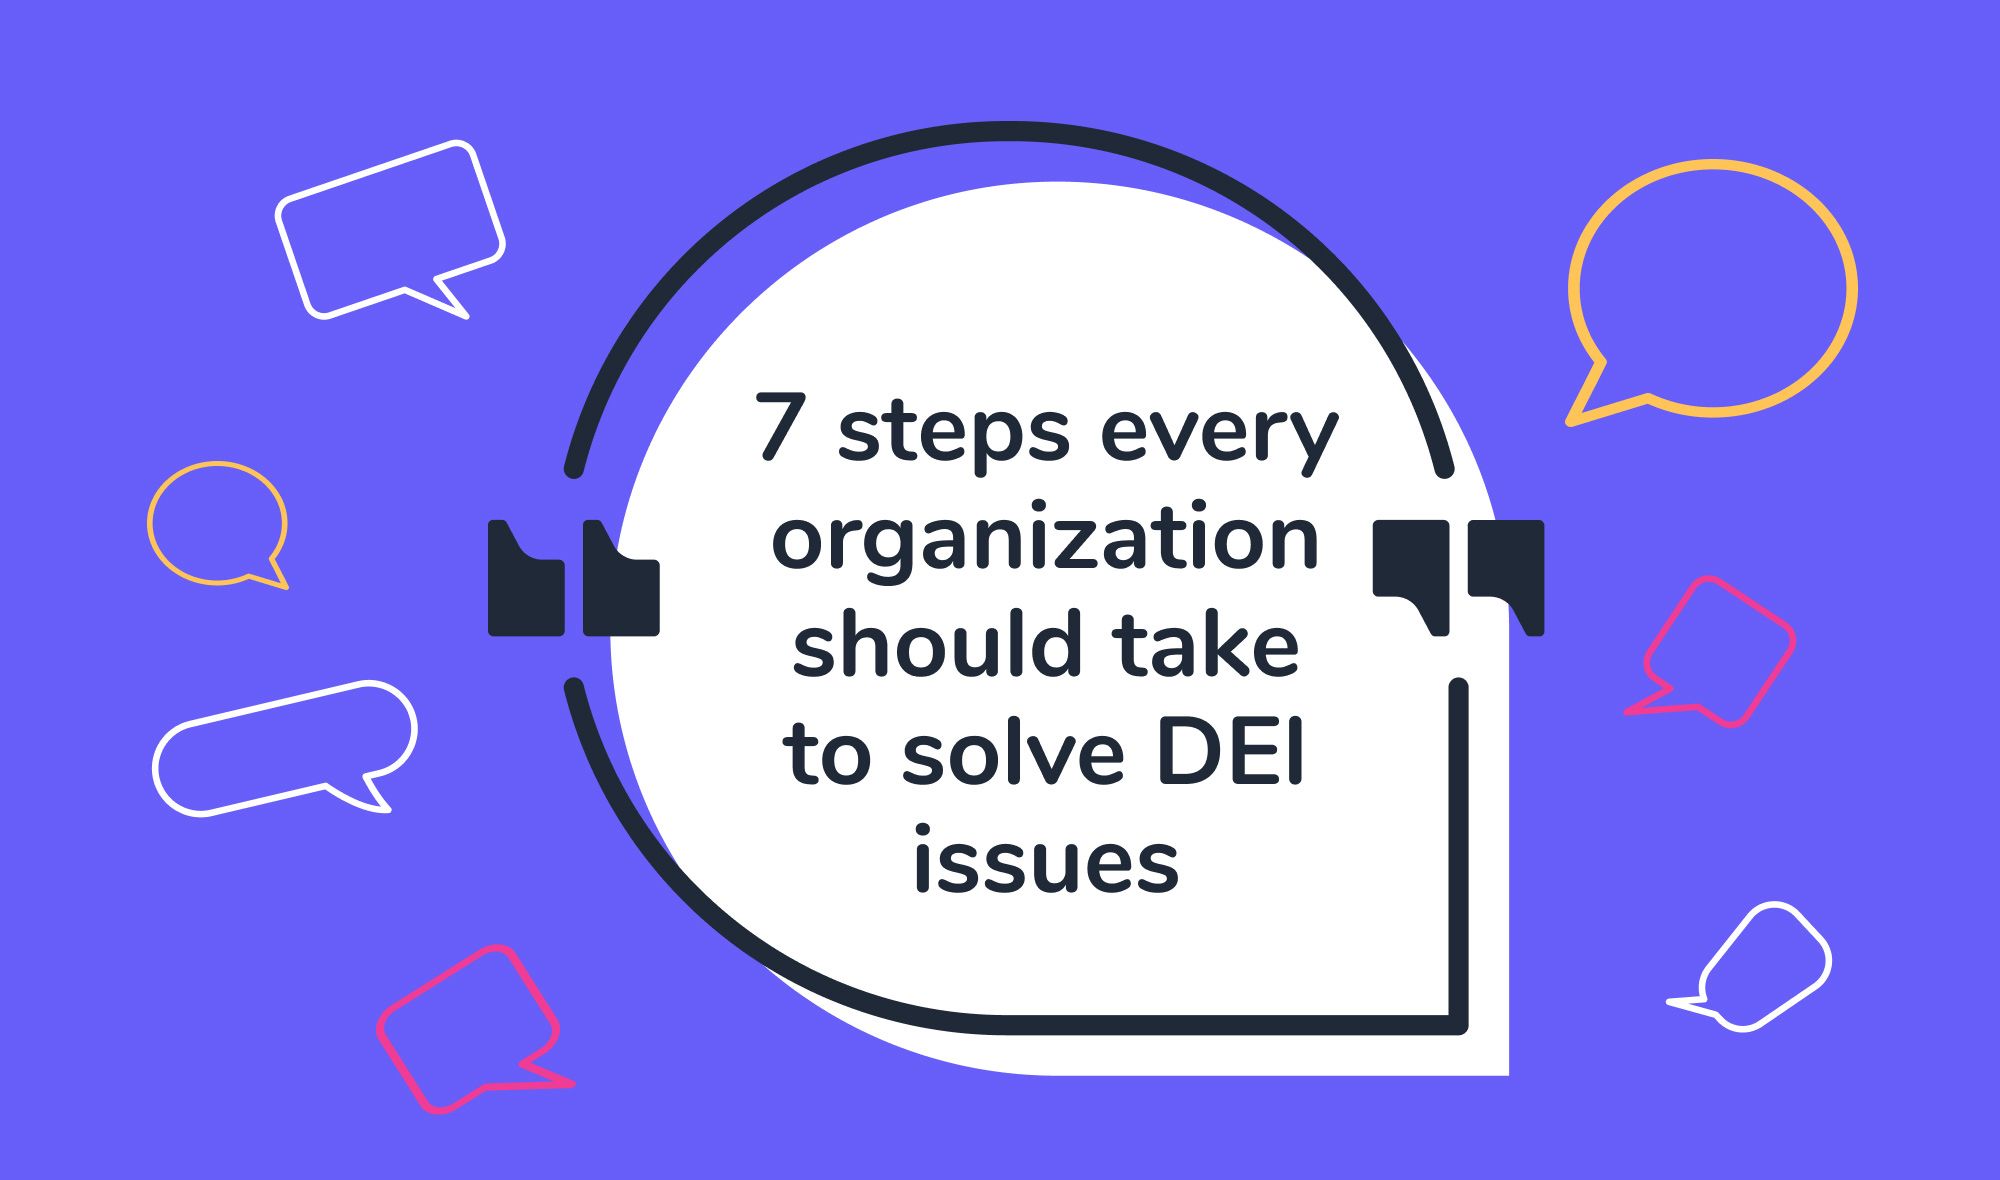 DEI - 7 steps every organization should take to solve DEI issues